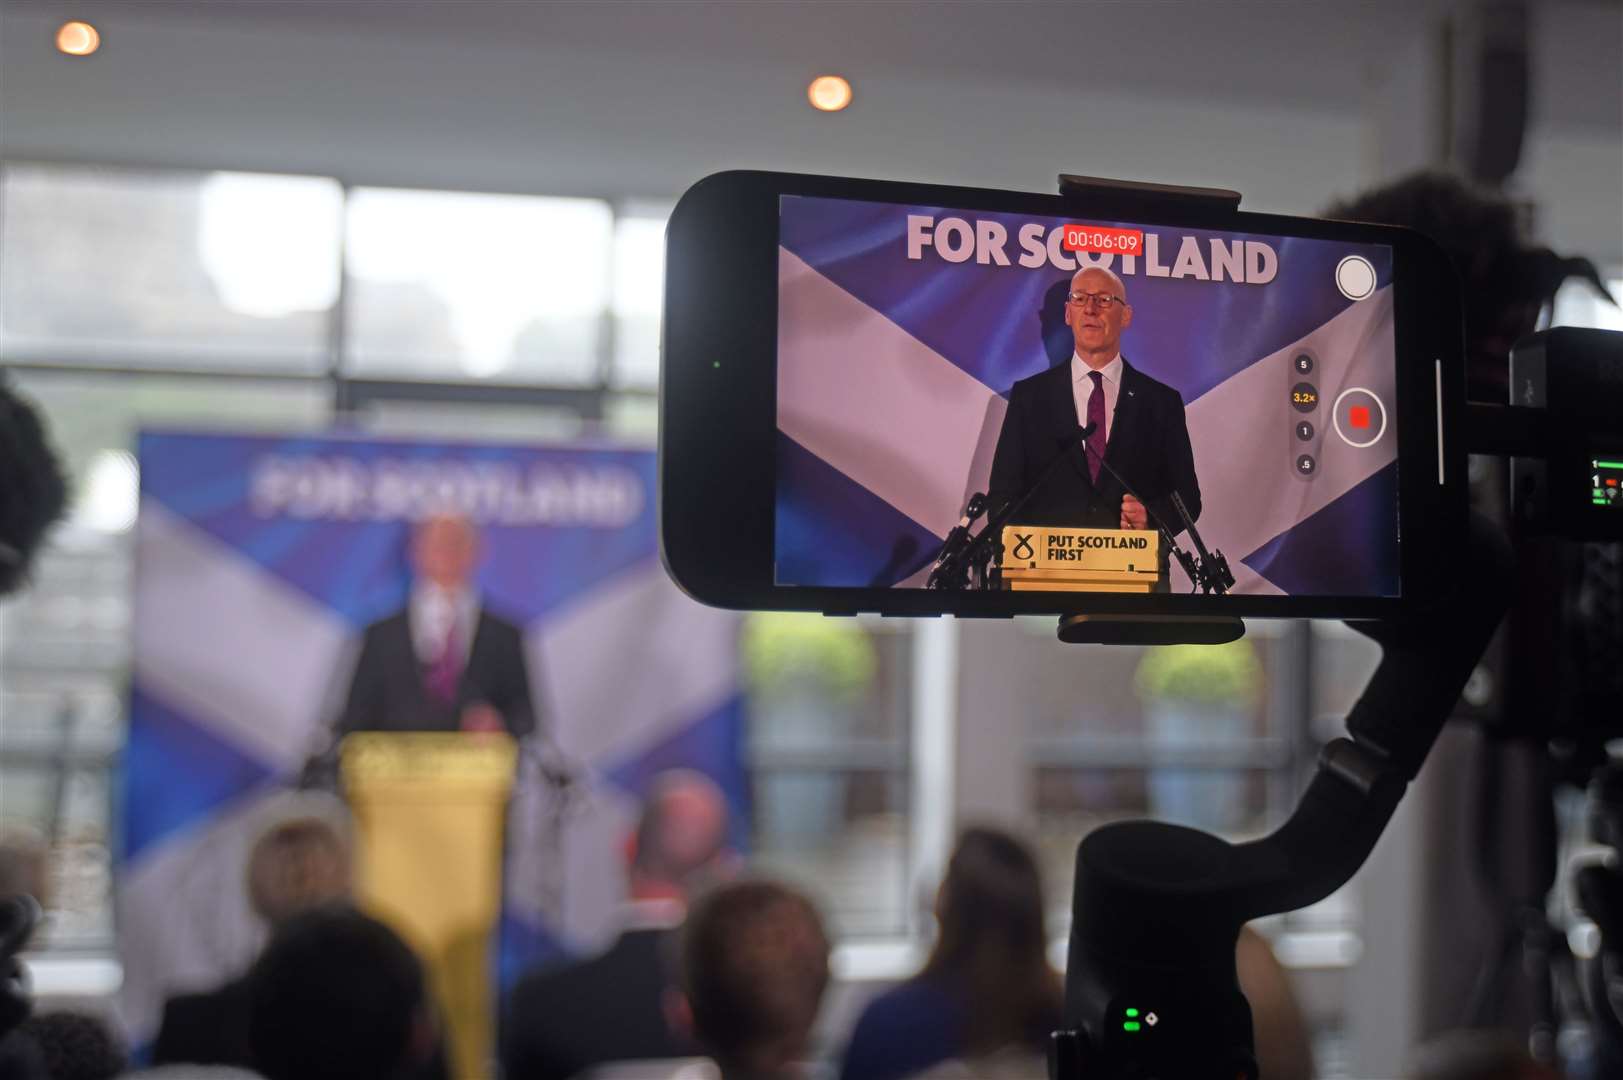 Scottish National Party leader John Swinney gives a speech at the launch of the the SNP’s campaign in Edinburgh. Mr Swinney is an MSP so will not be standing for a Westminster seat (Michael Boyd/PA)